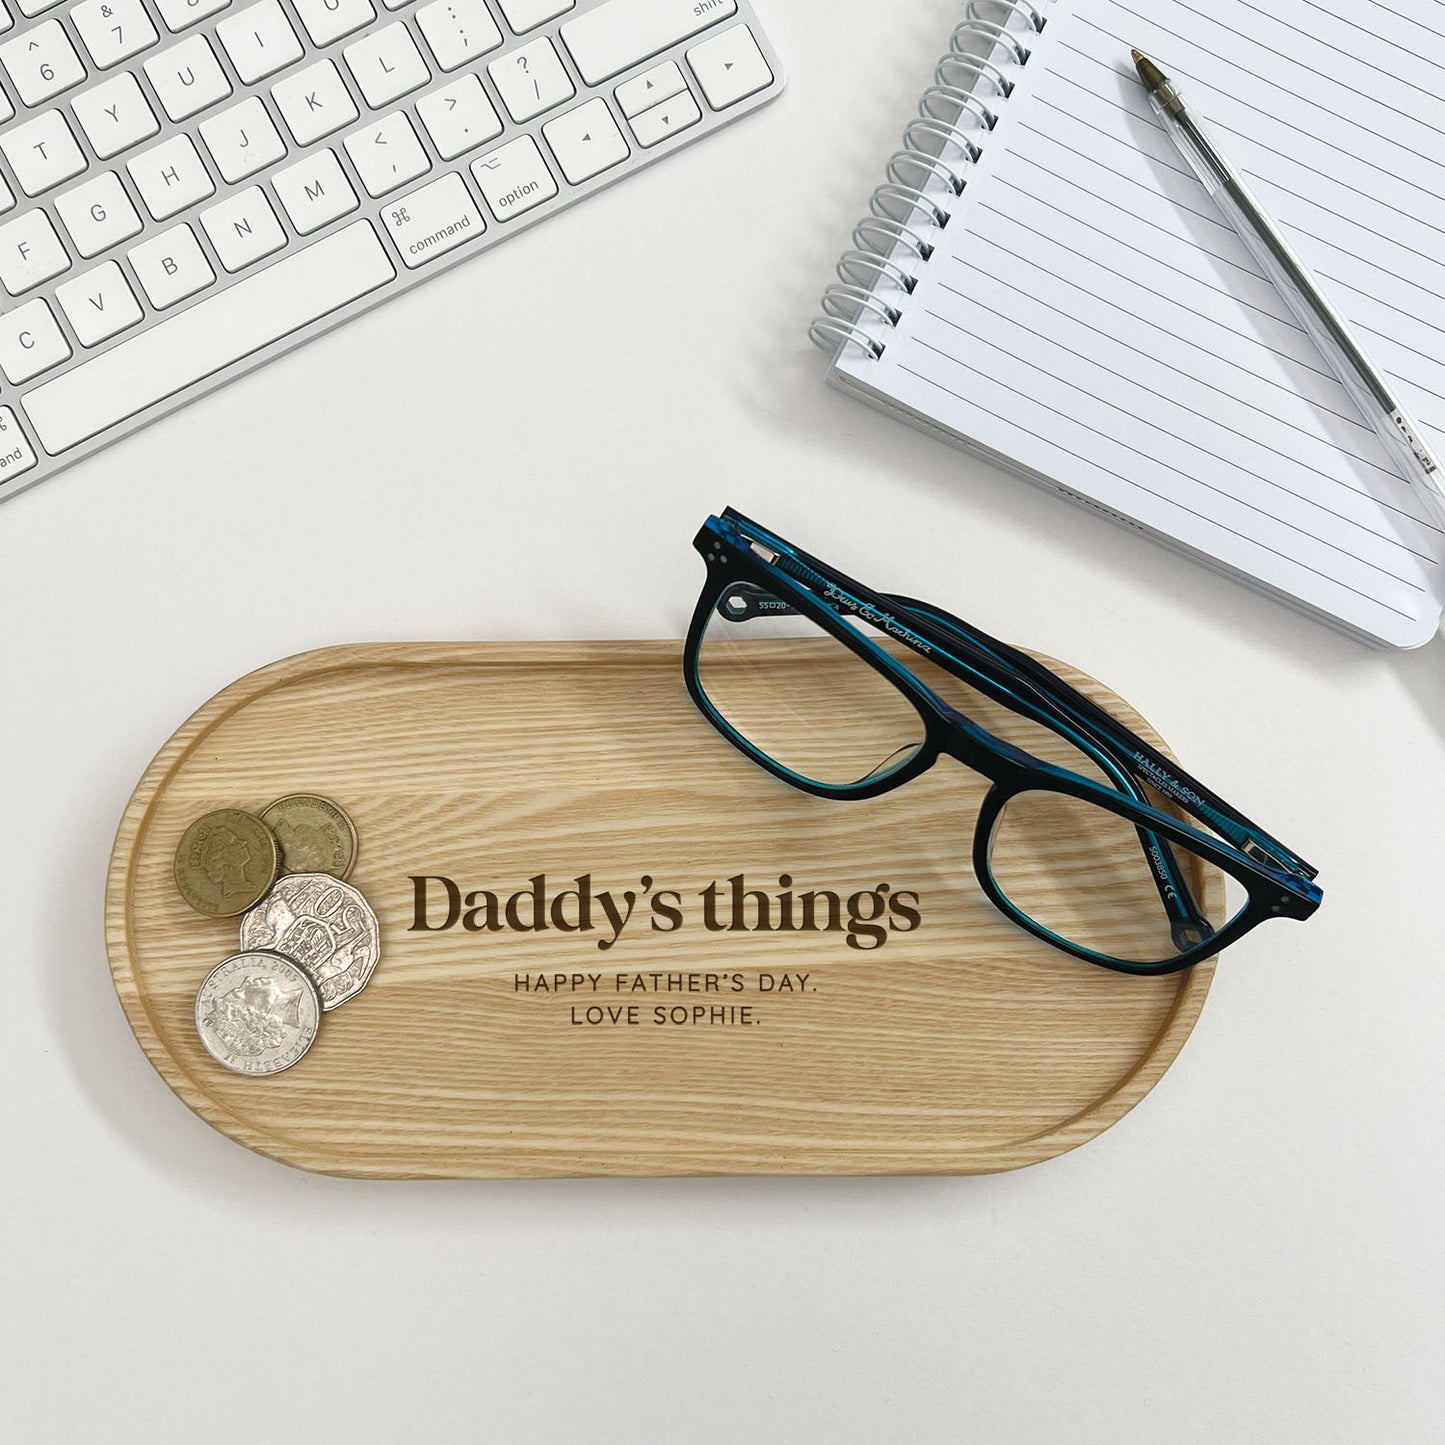 Father's Day Wooden Trinket Tray - Daddy's Things